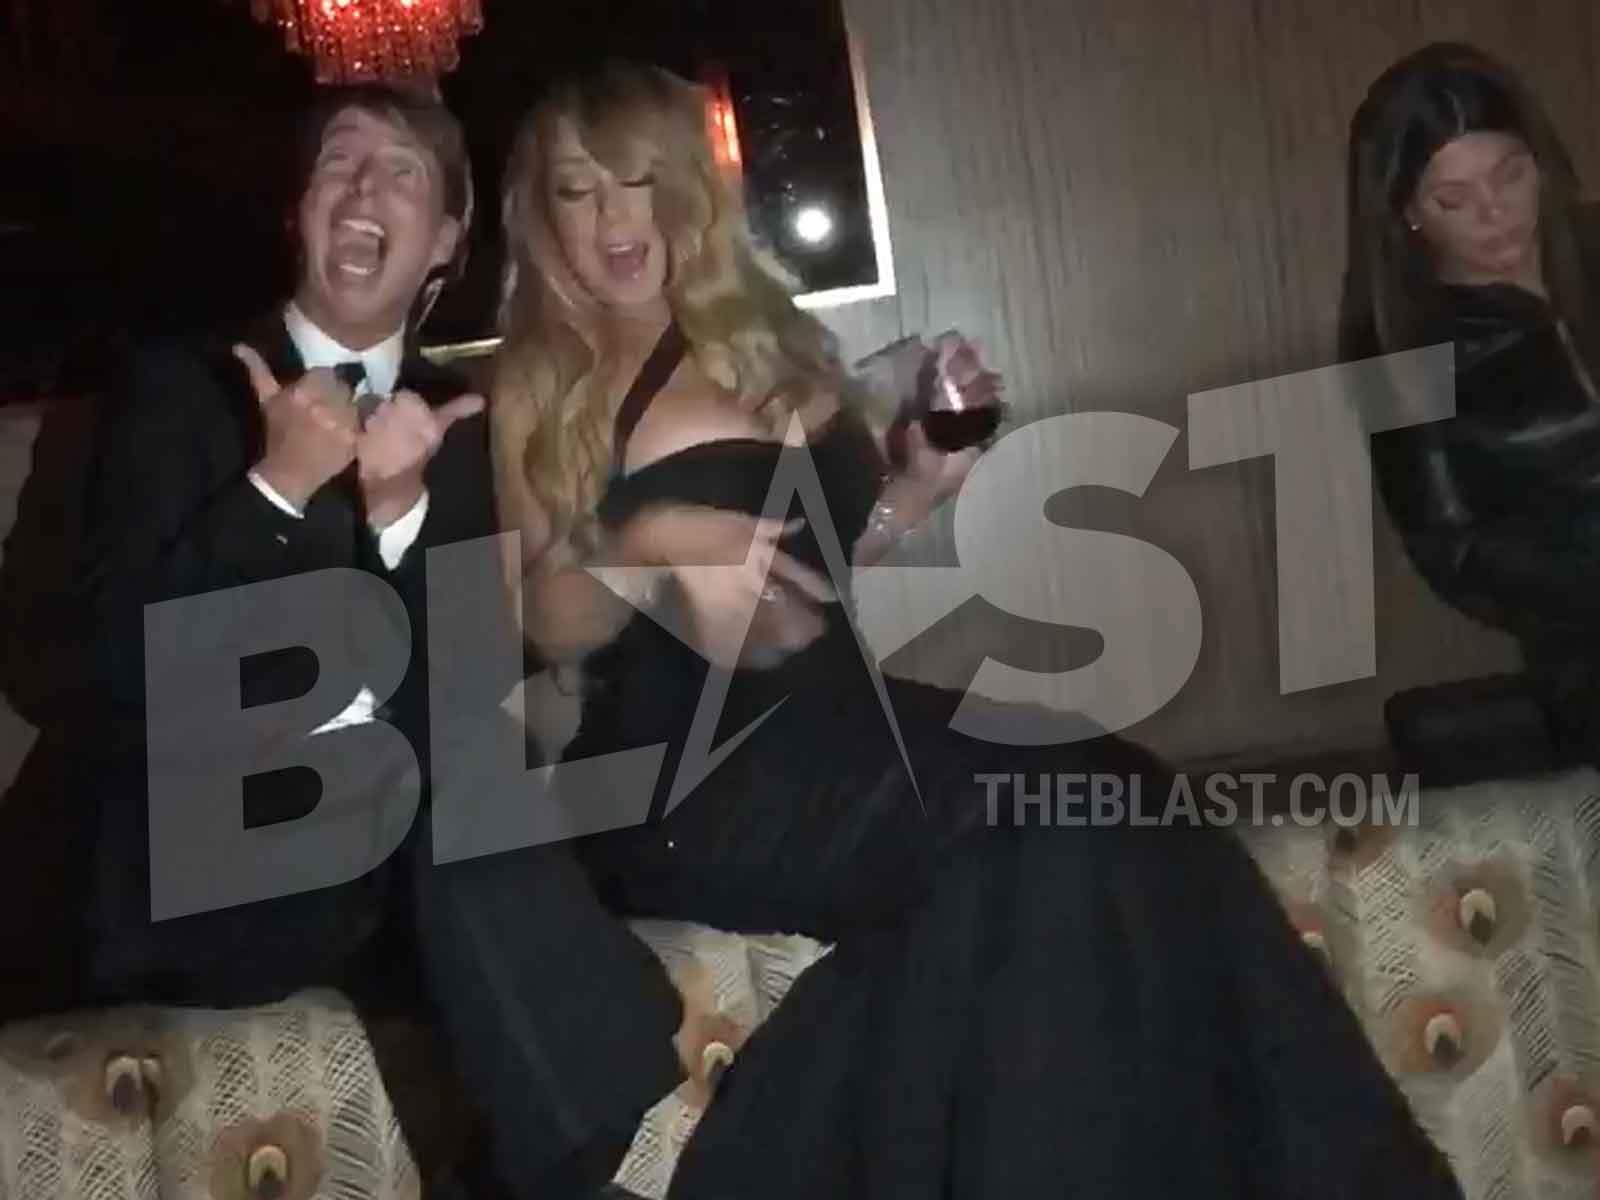 Mariah Carey Flirting With, Serenading Jack McBrayer Is The Only Golden Globes Party Moment That Matters